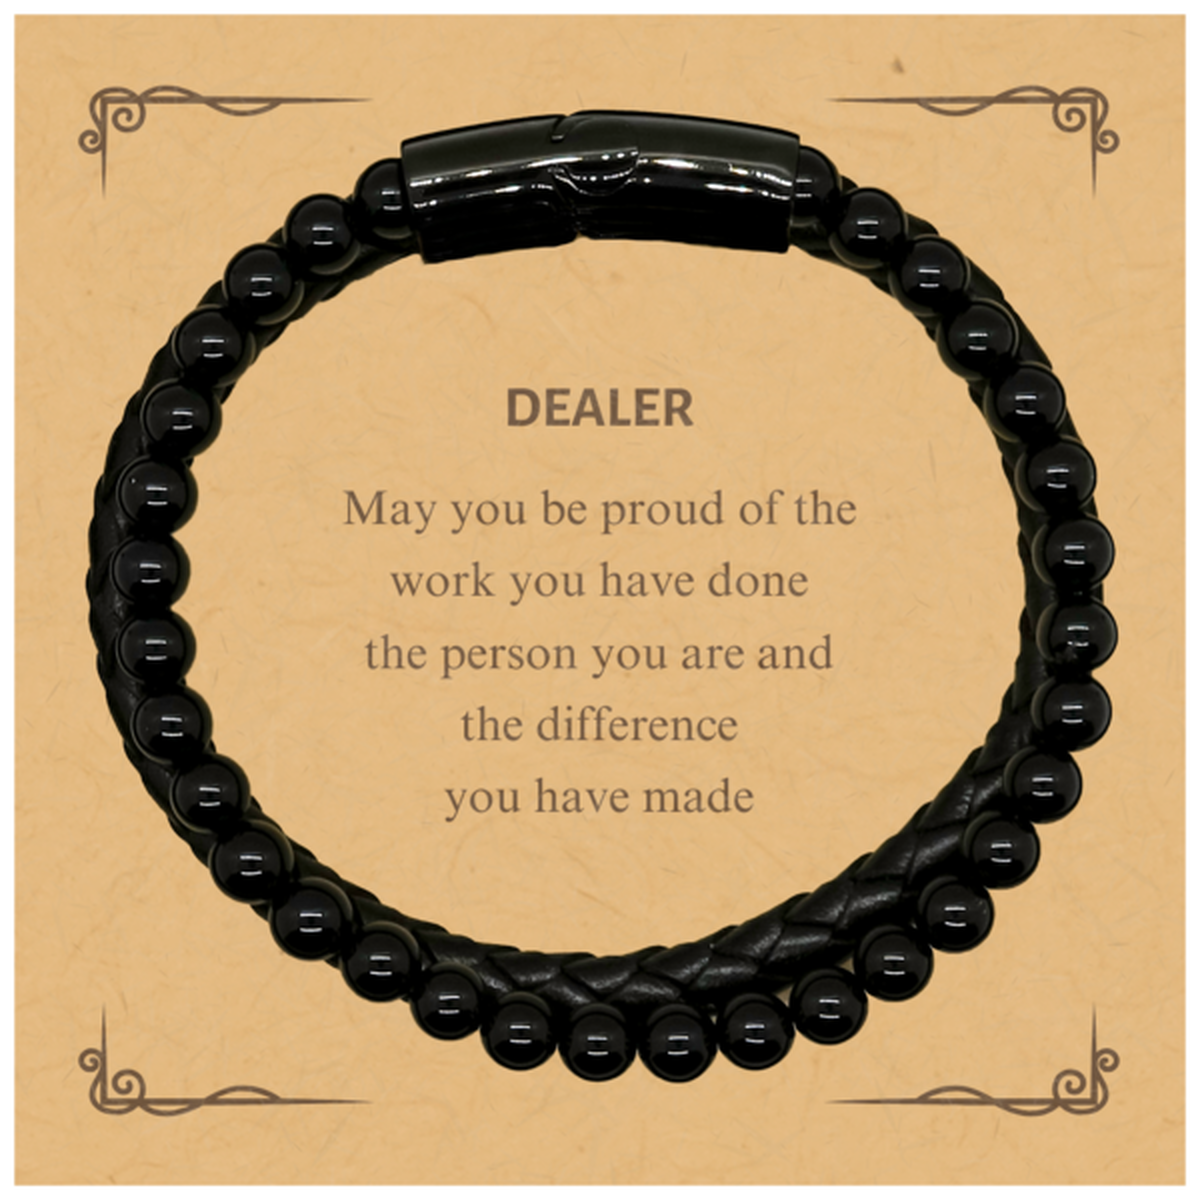 Dealer May you be proud of the work you have done, Retirement Dealer Stone Leather Bracelets for Colleague Appreciation Gifts Amazing for Dealer